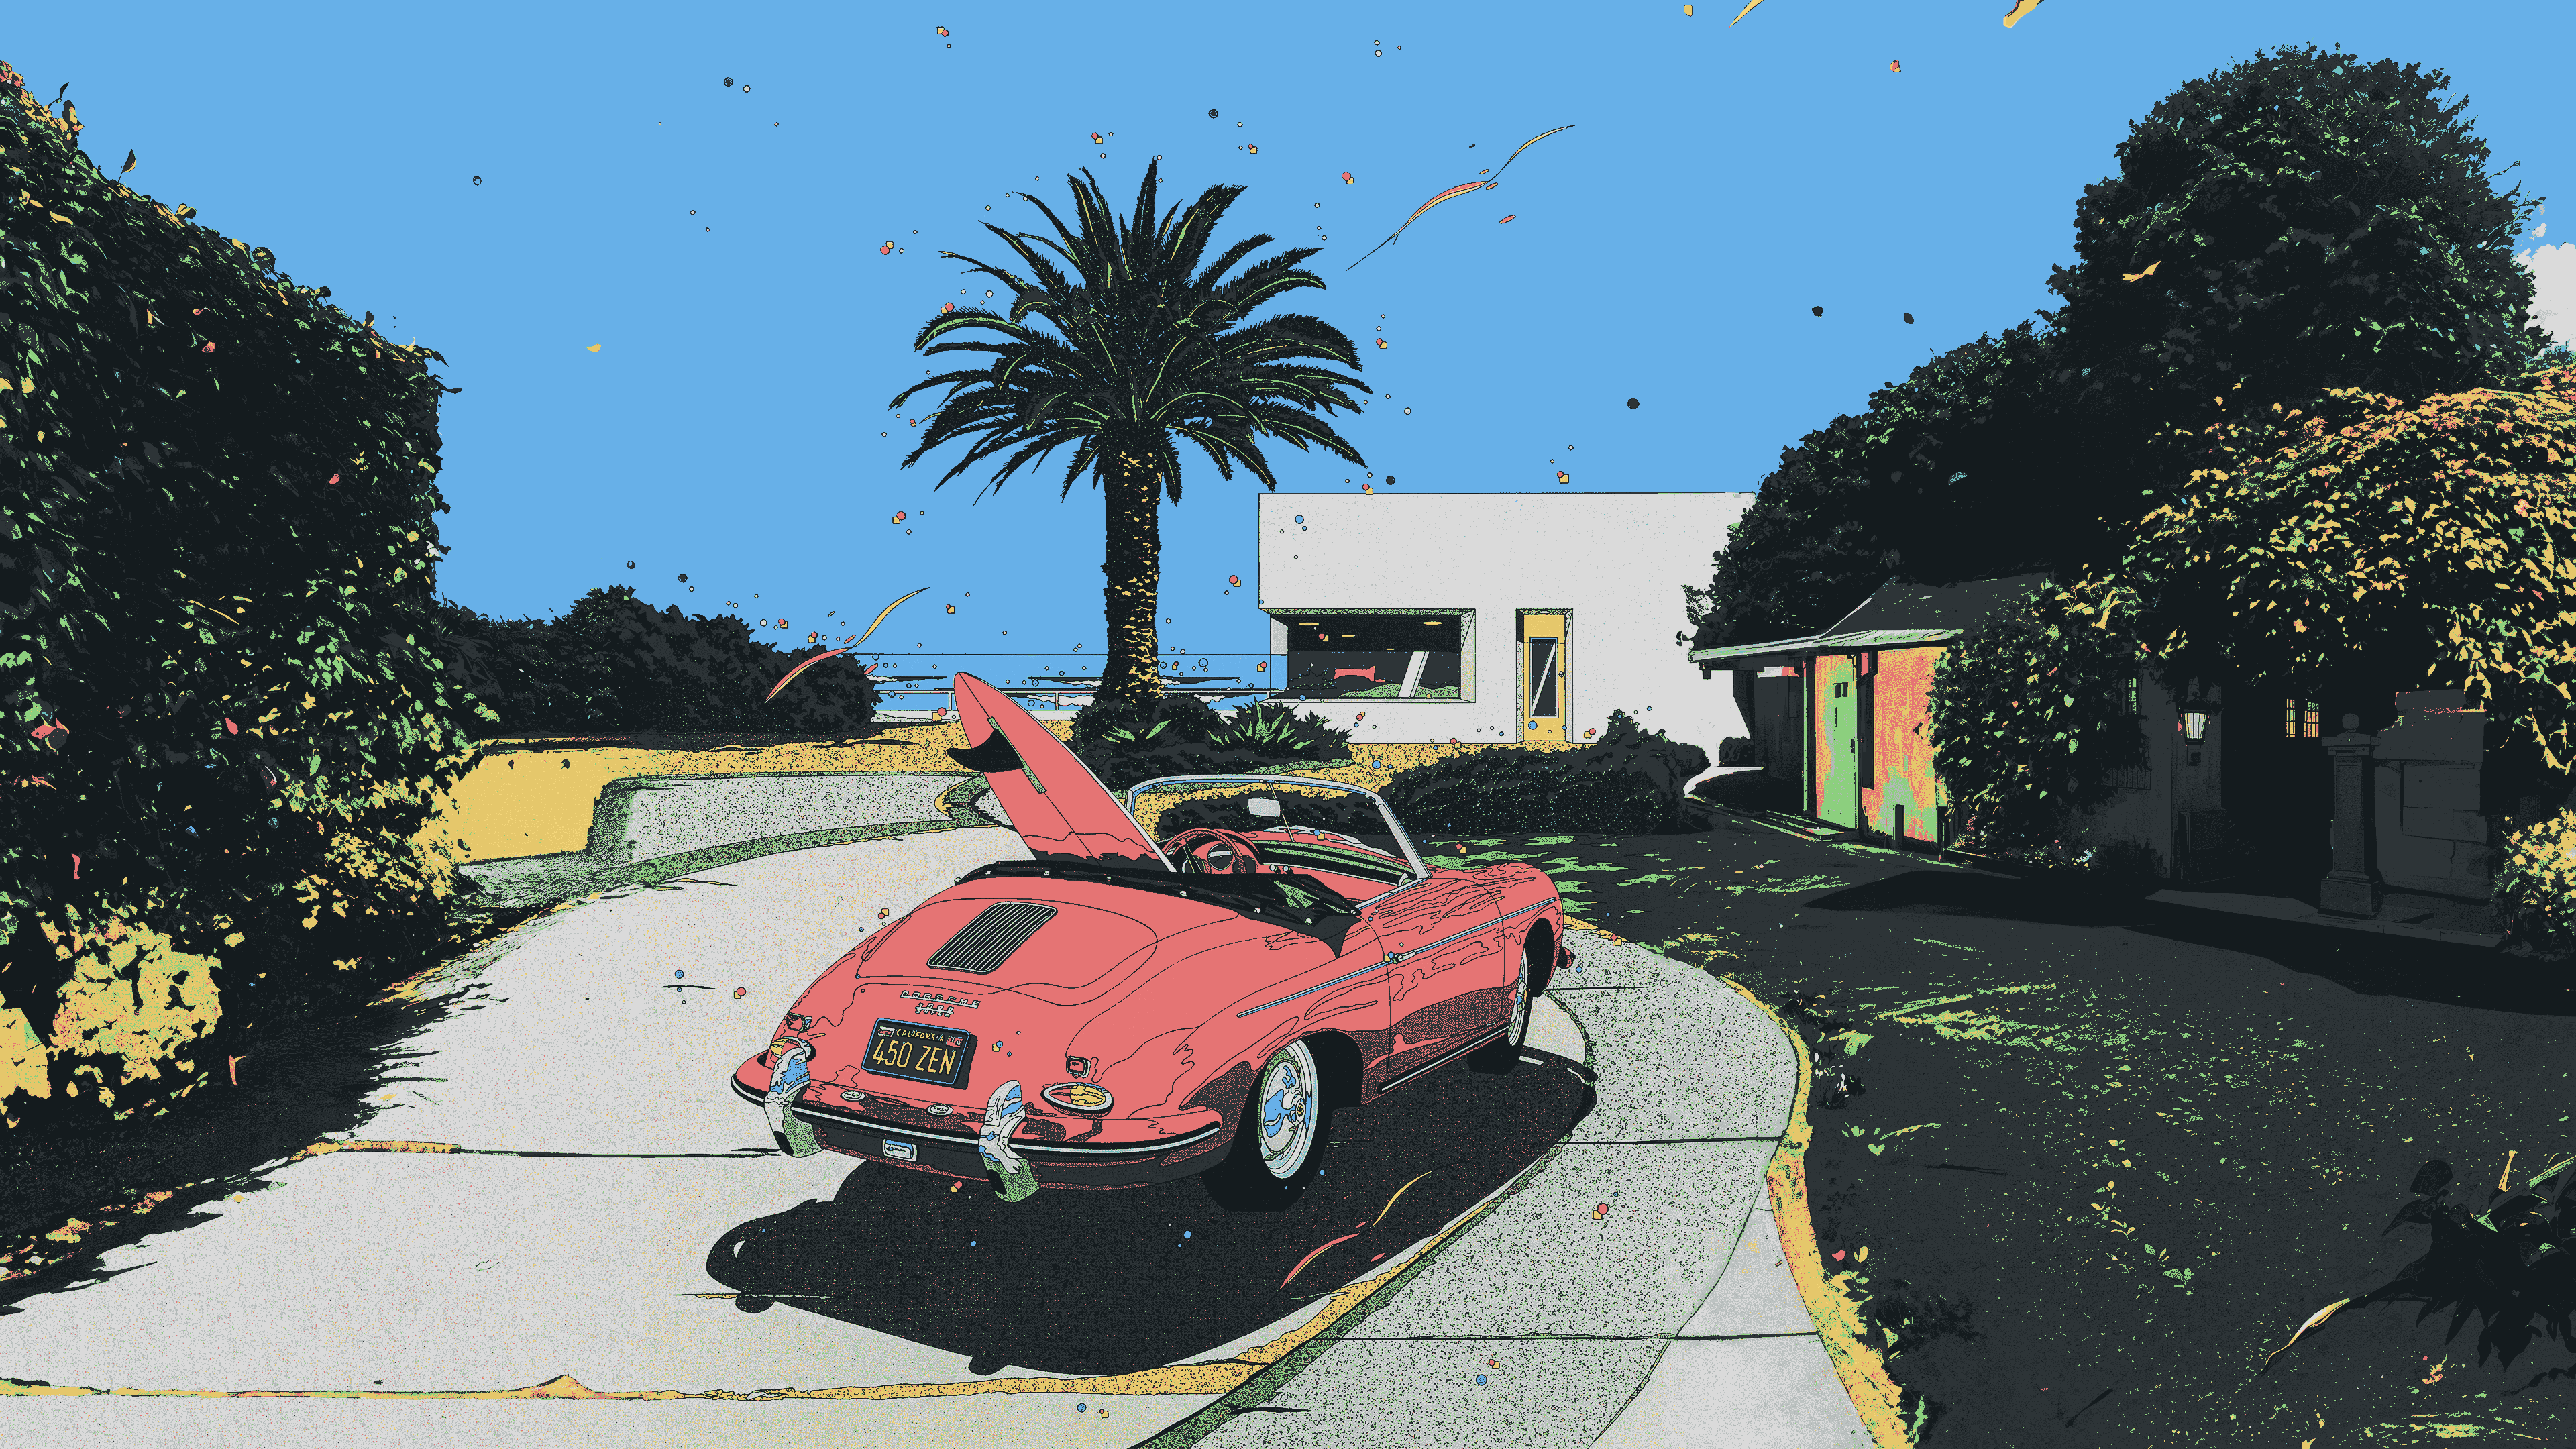 General 3840x2160 car cabriolet minimalism clear sky rear view vehicle palm trees licence plates digital art